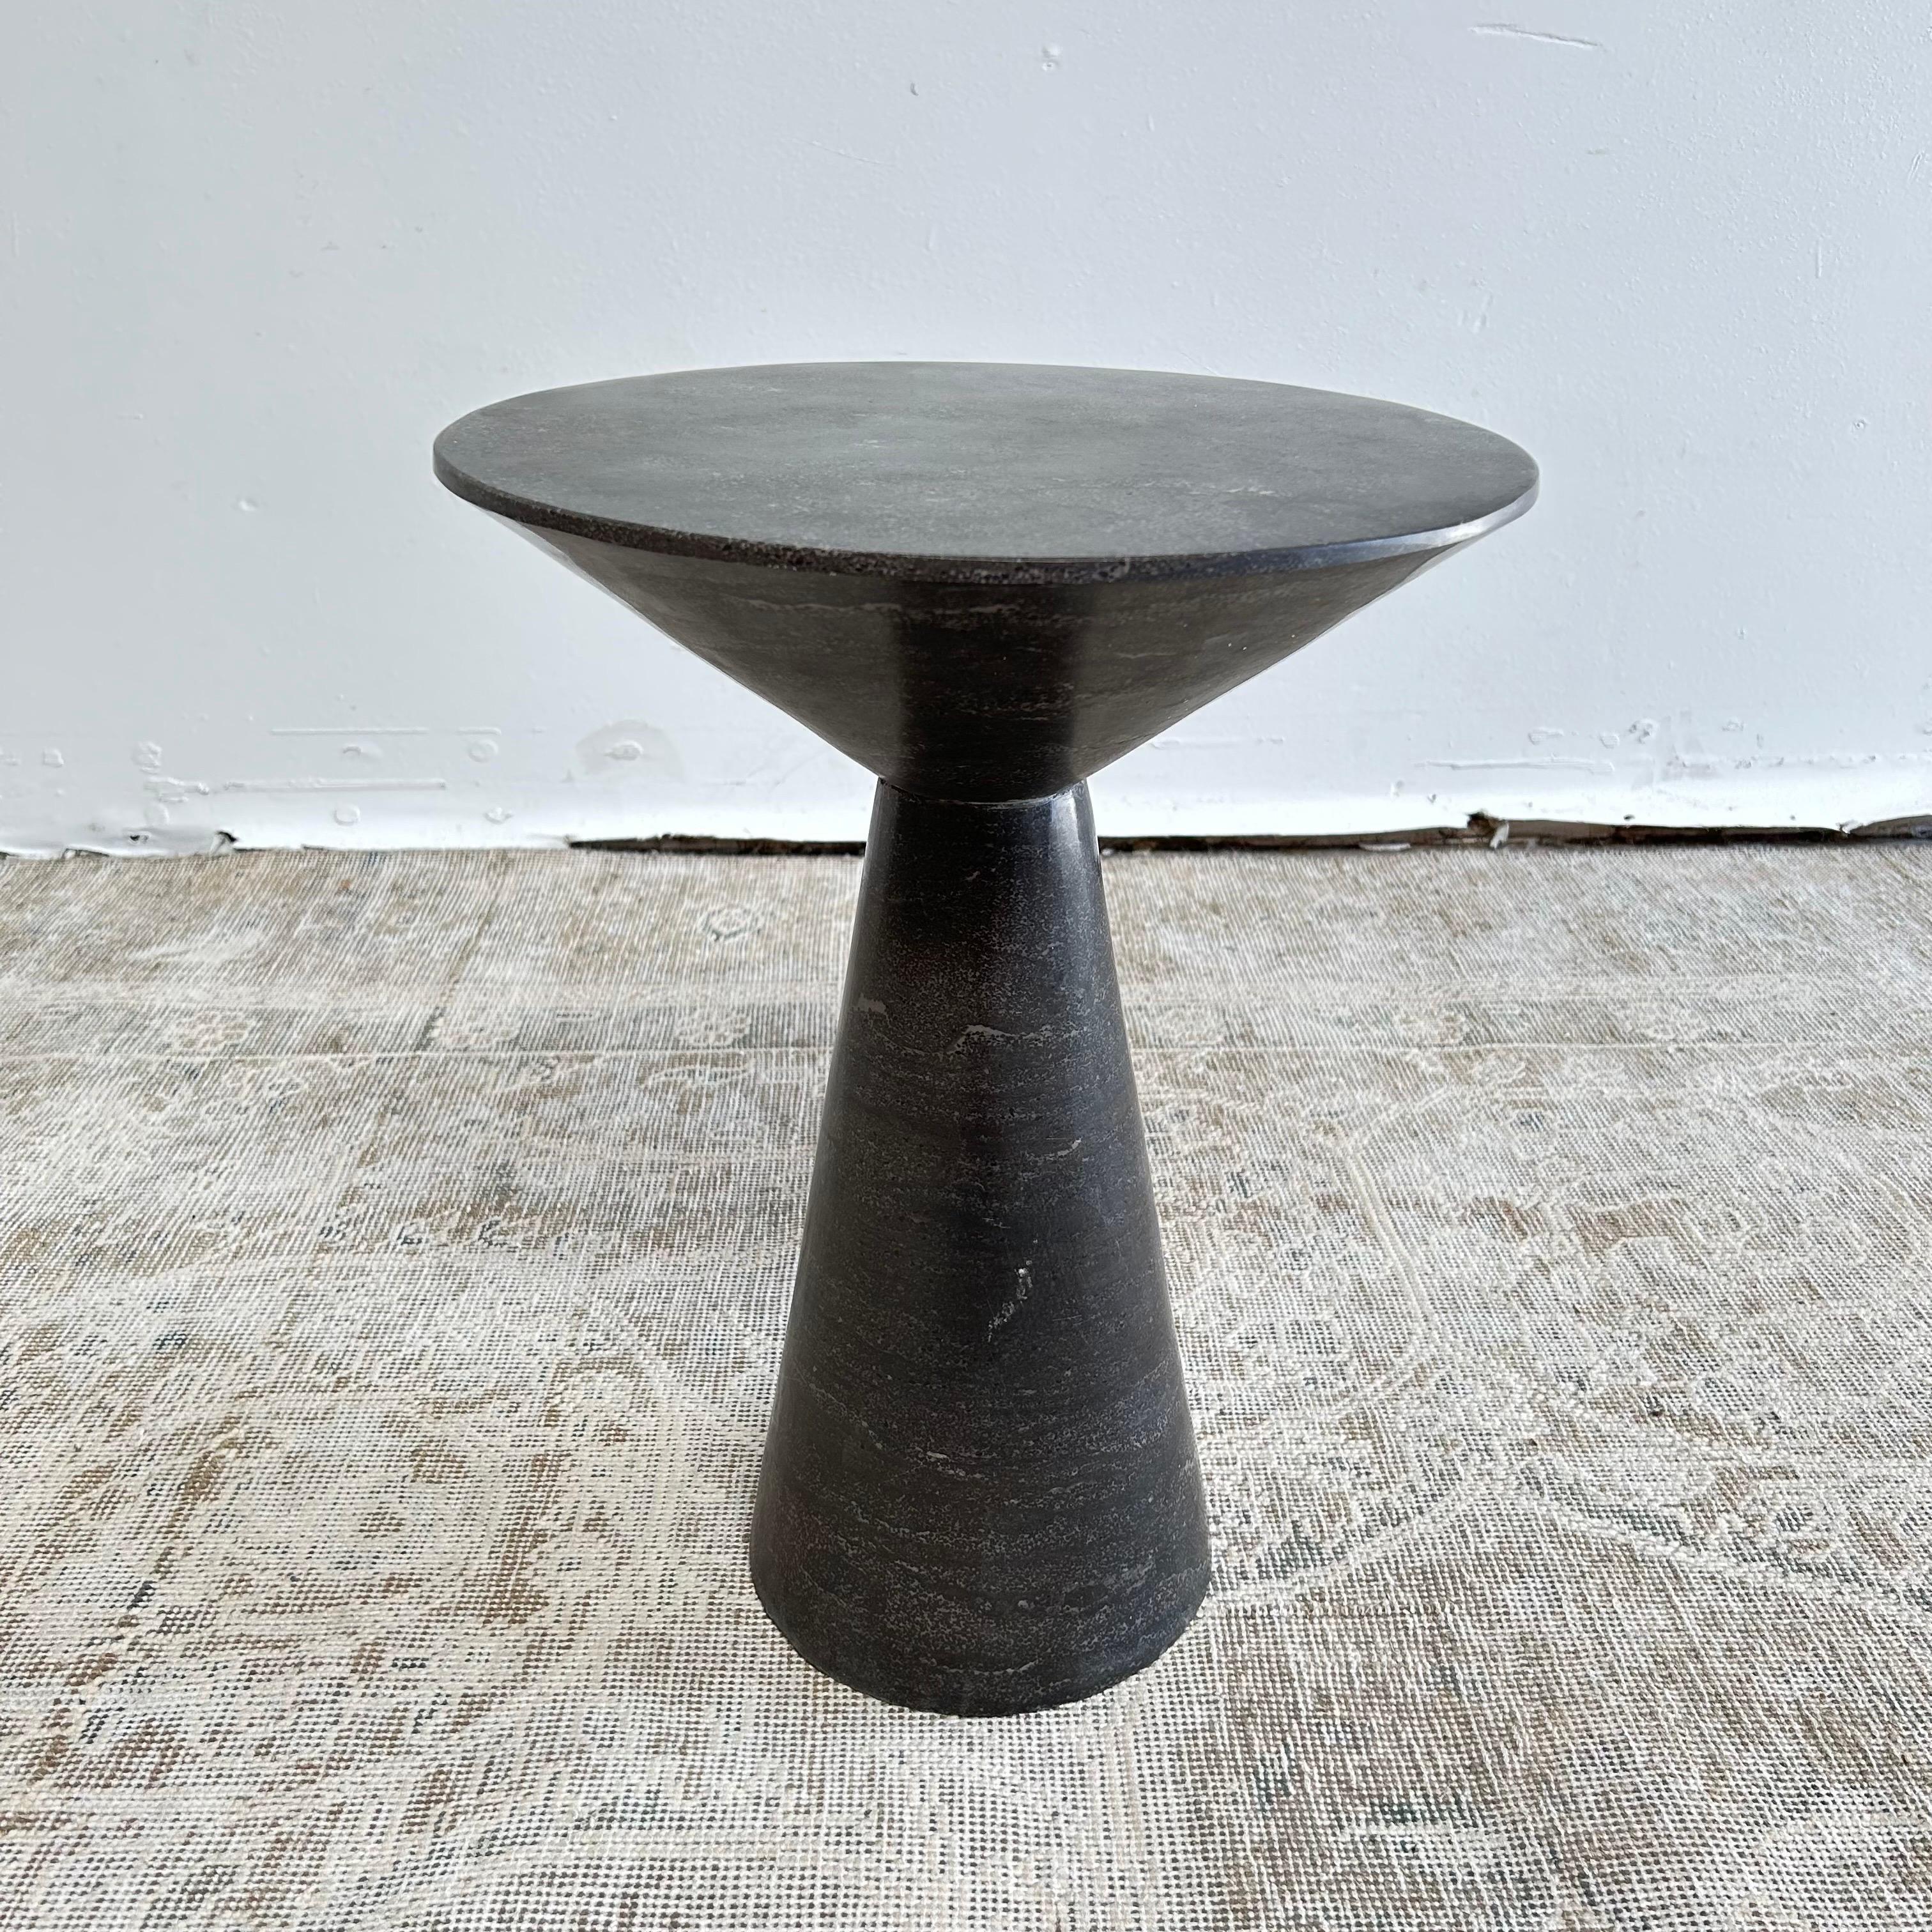 Modern side table in a washed charcoal color
Material: Bluestone
Finish: Washed Black Stone Finish
Width: 14 in
Depth: 14 in
Height: 19 in
Volume: 2.16 cu ft
Weight: 72 lbs
this item can not ship by UPS due to it weight. Pick up or freight carrier